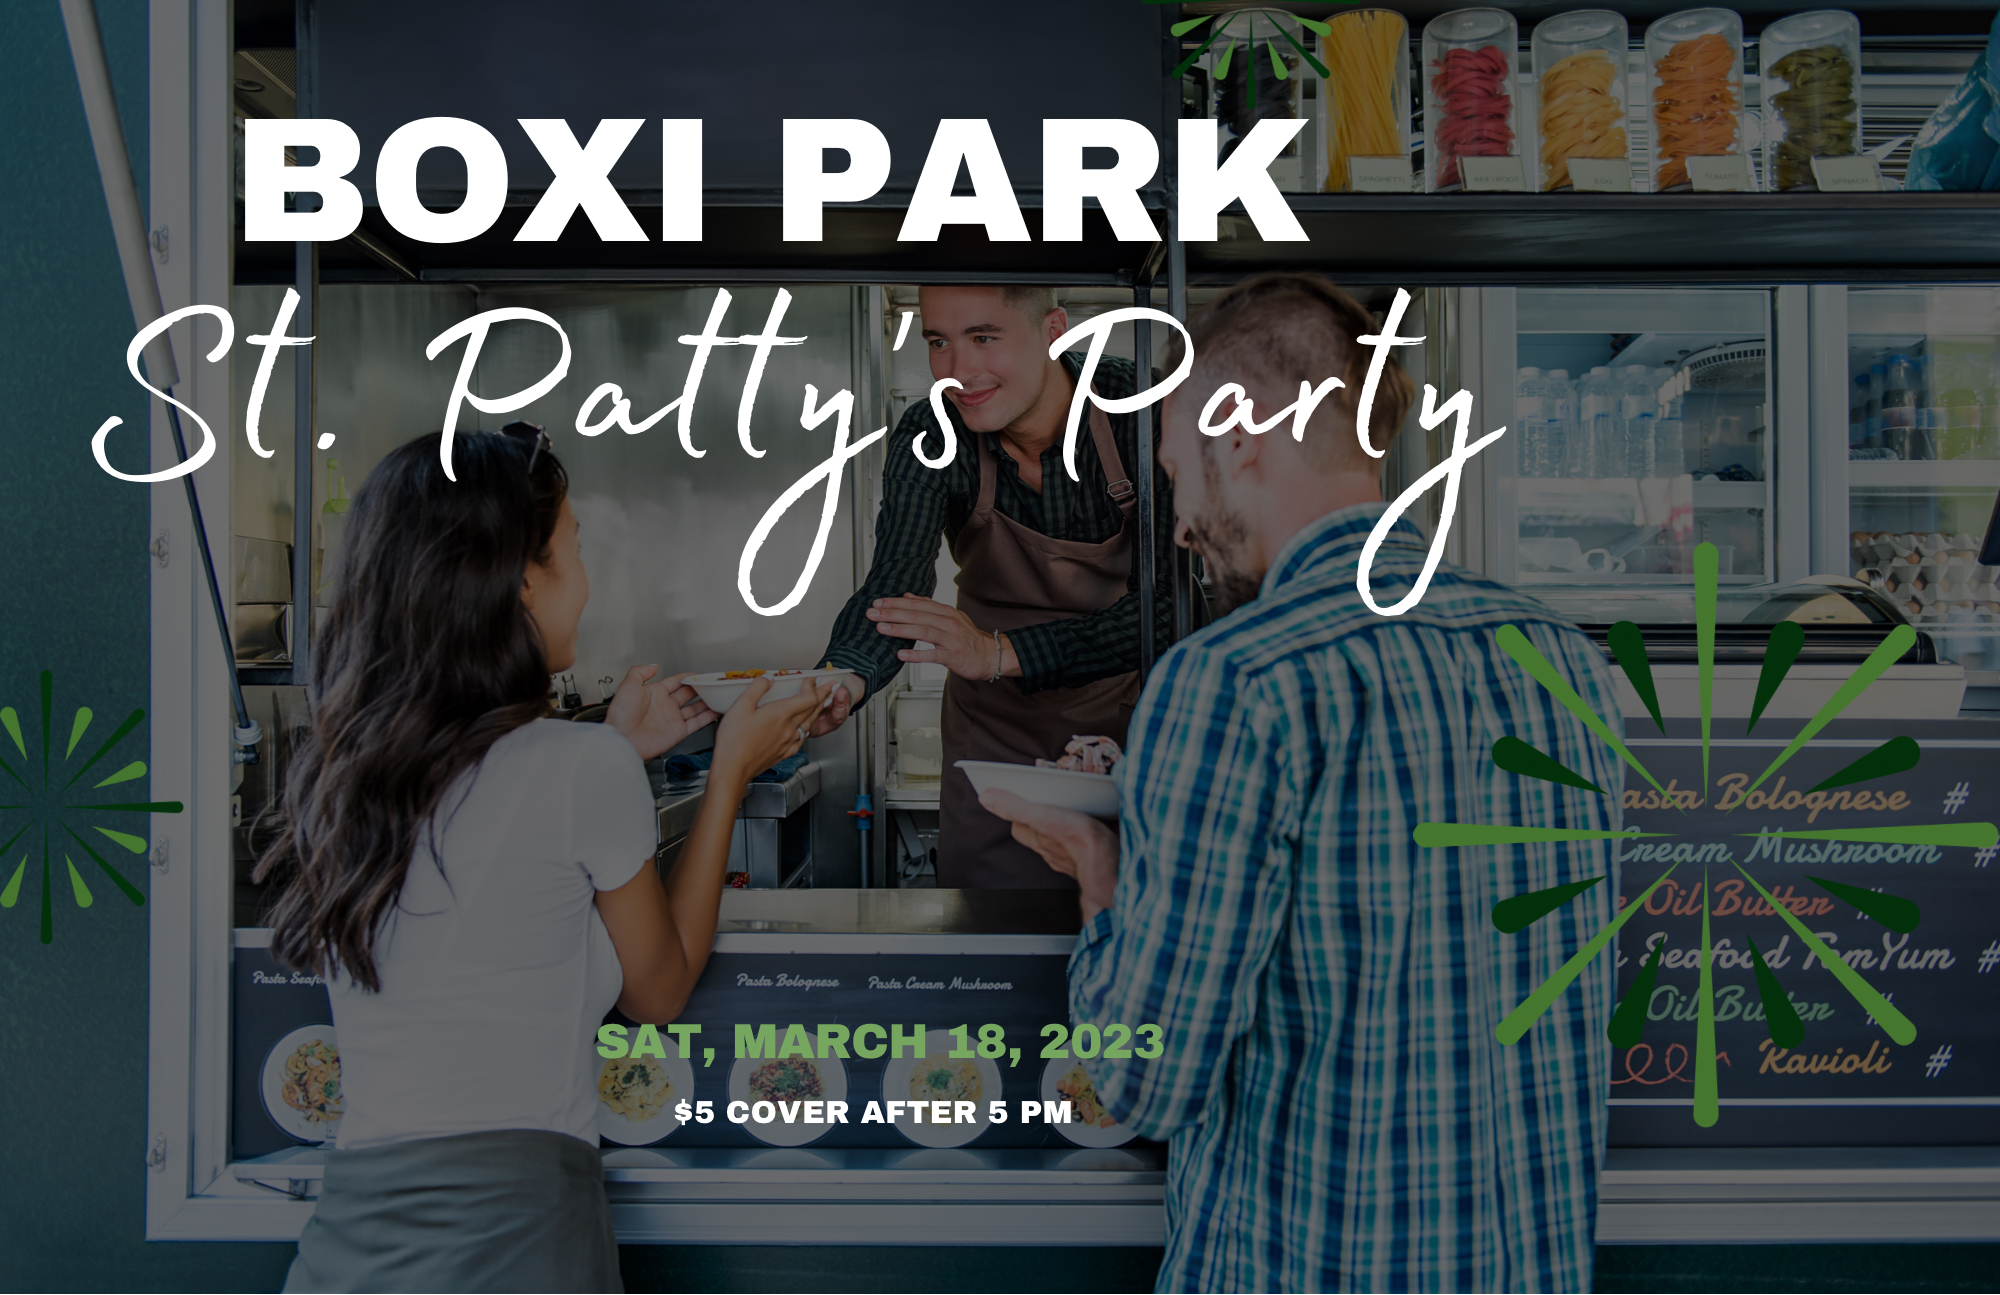 ST. PATRICK’S DAY PARTY AT BOXI PARK